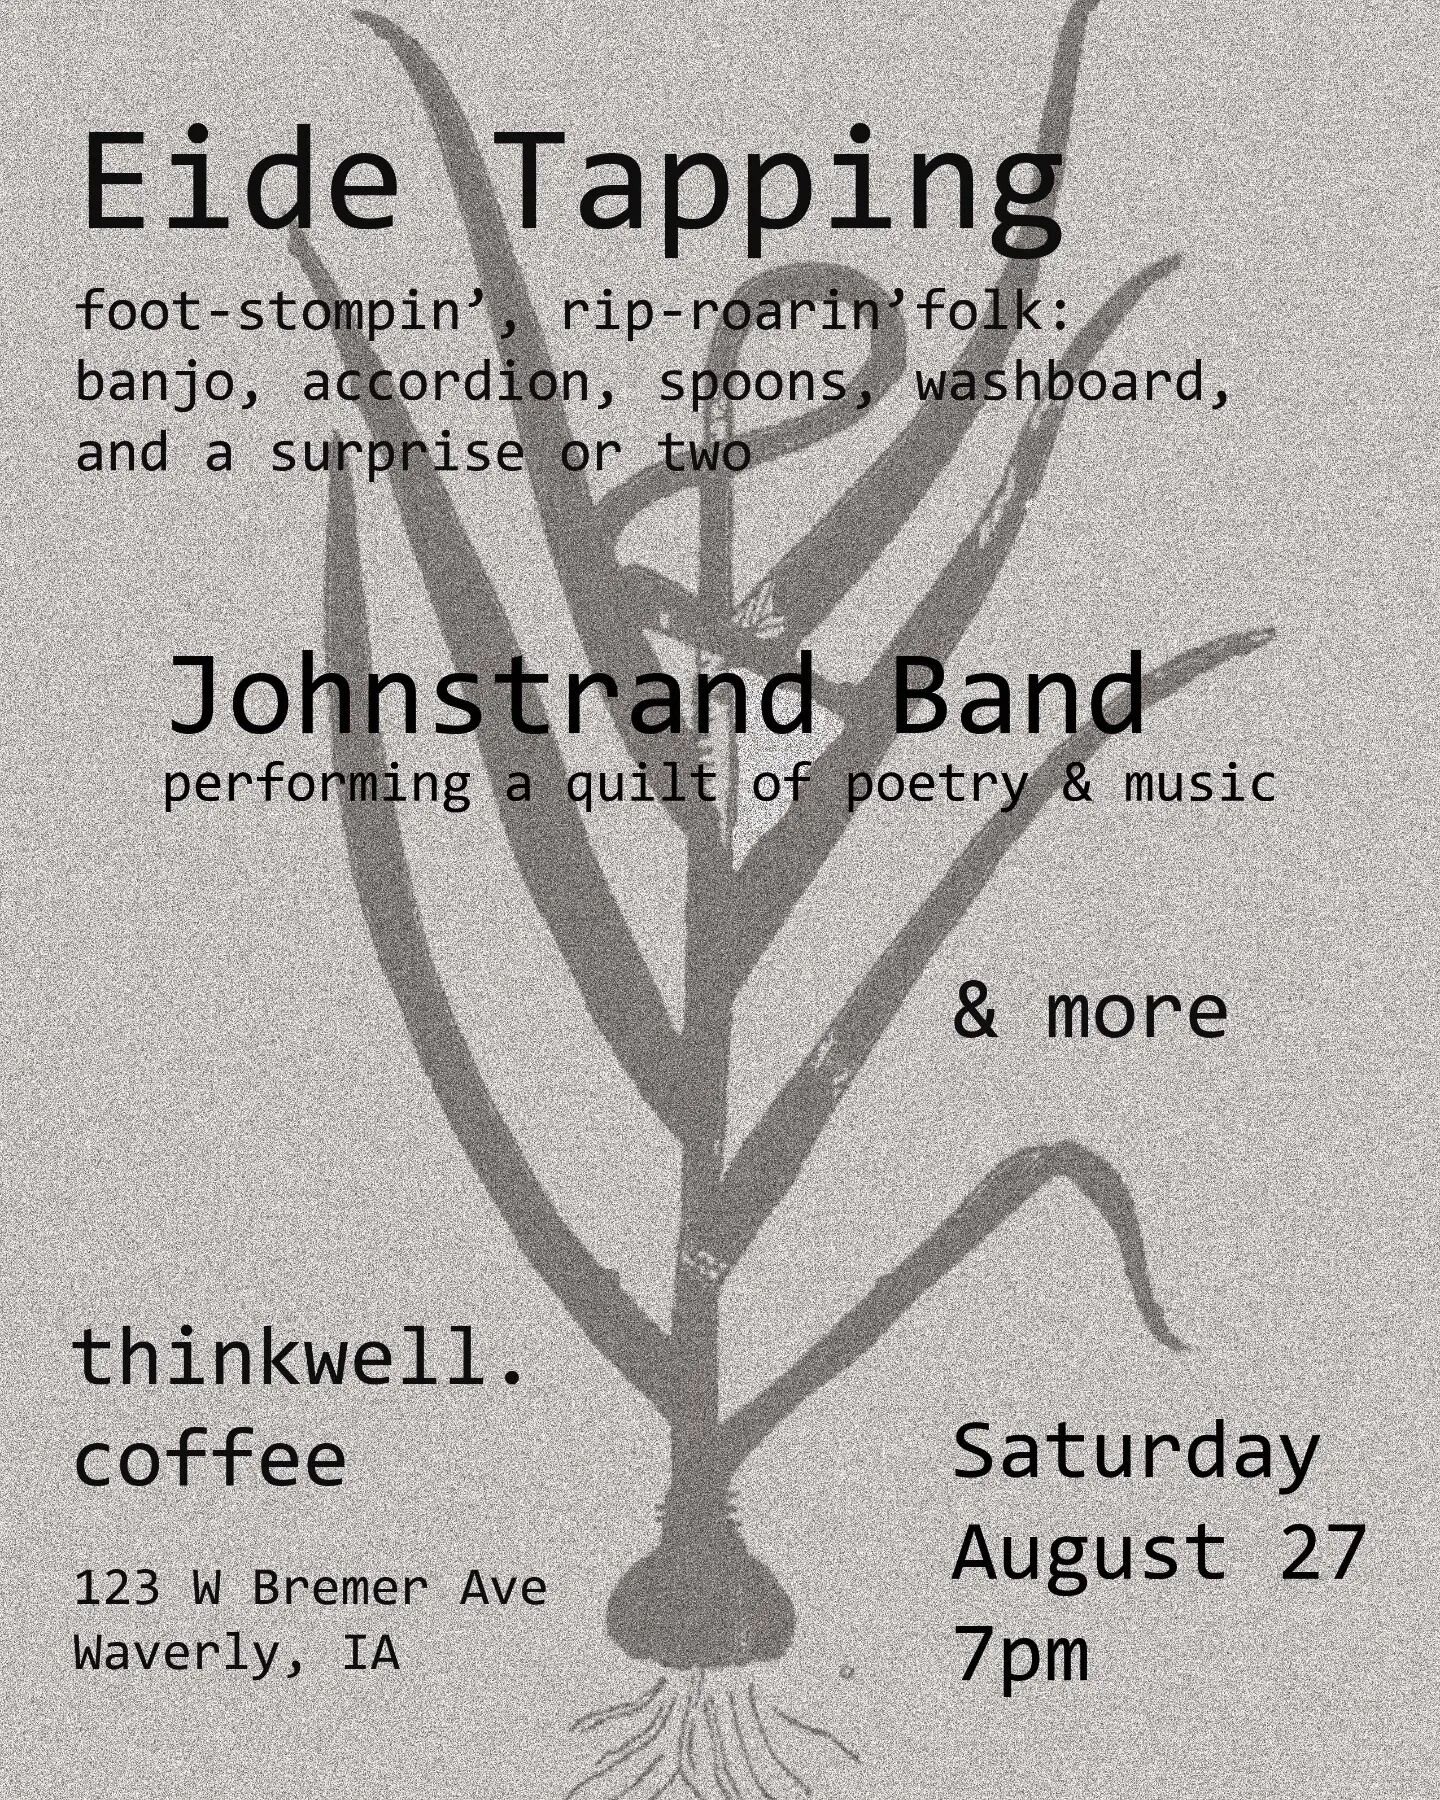 Looking forward to some great music &amp; poetry tonight at @thinkwell.coffee